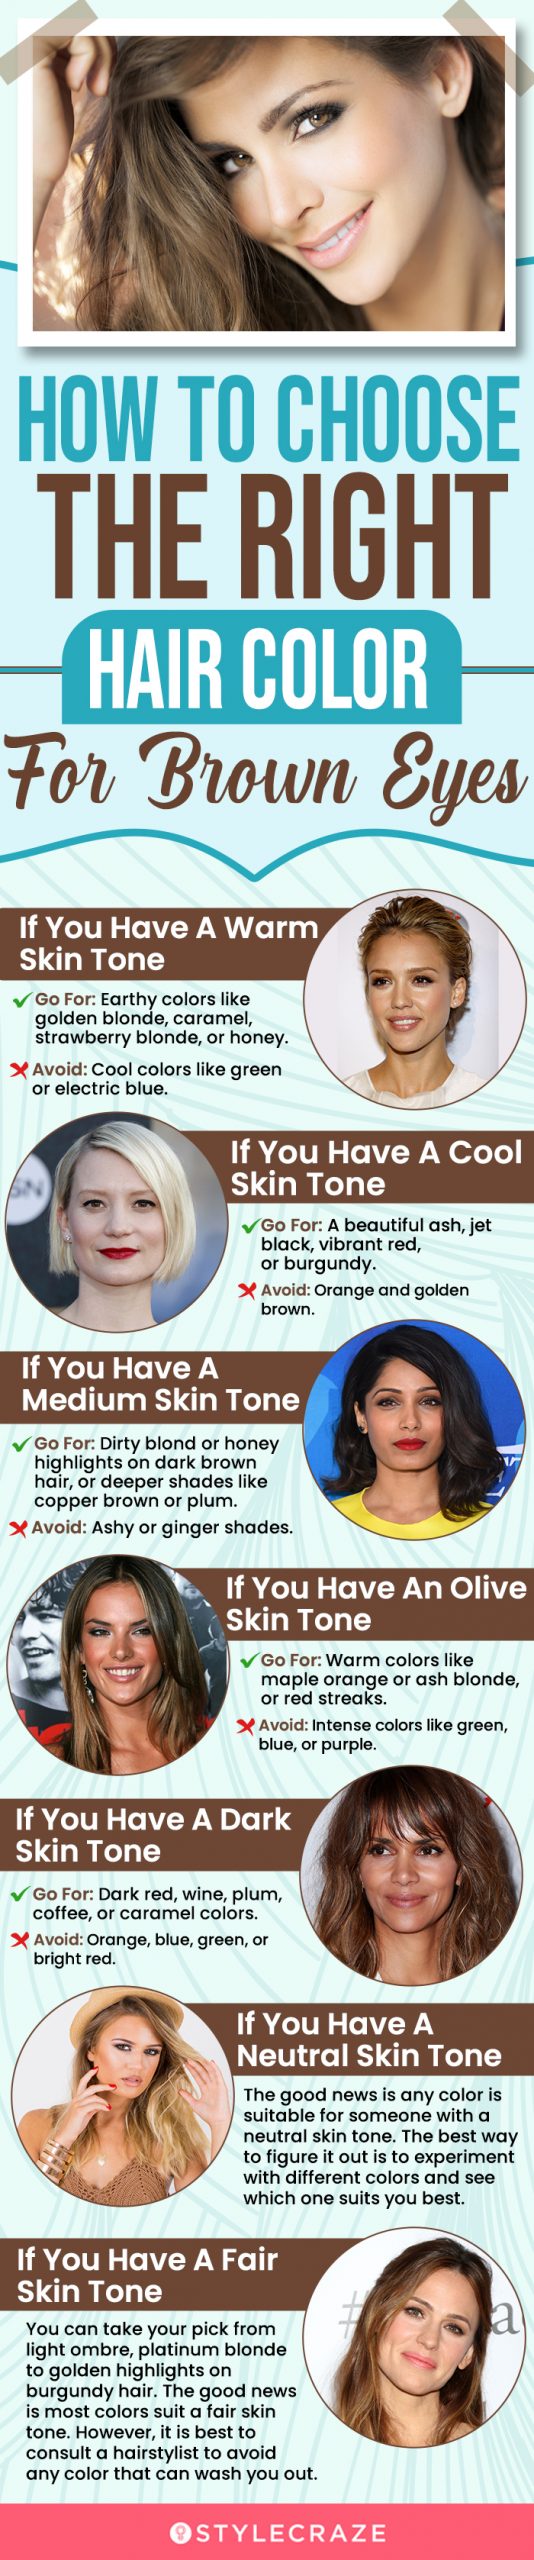 The Best Hair Colors to Complement Warm and Neutral Skin Tones